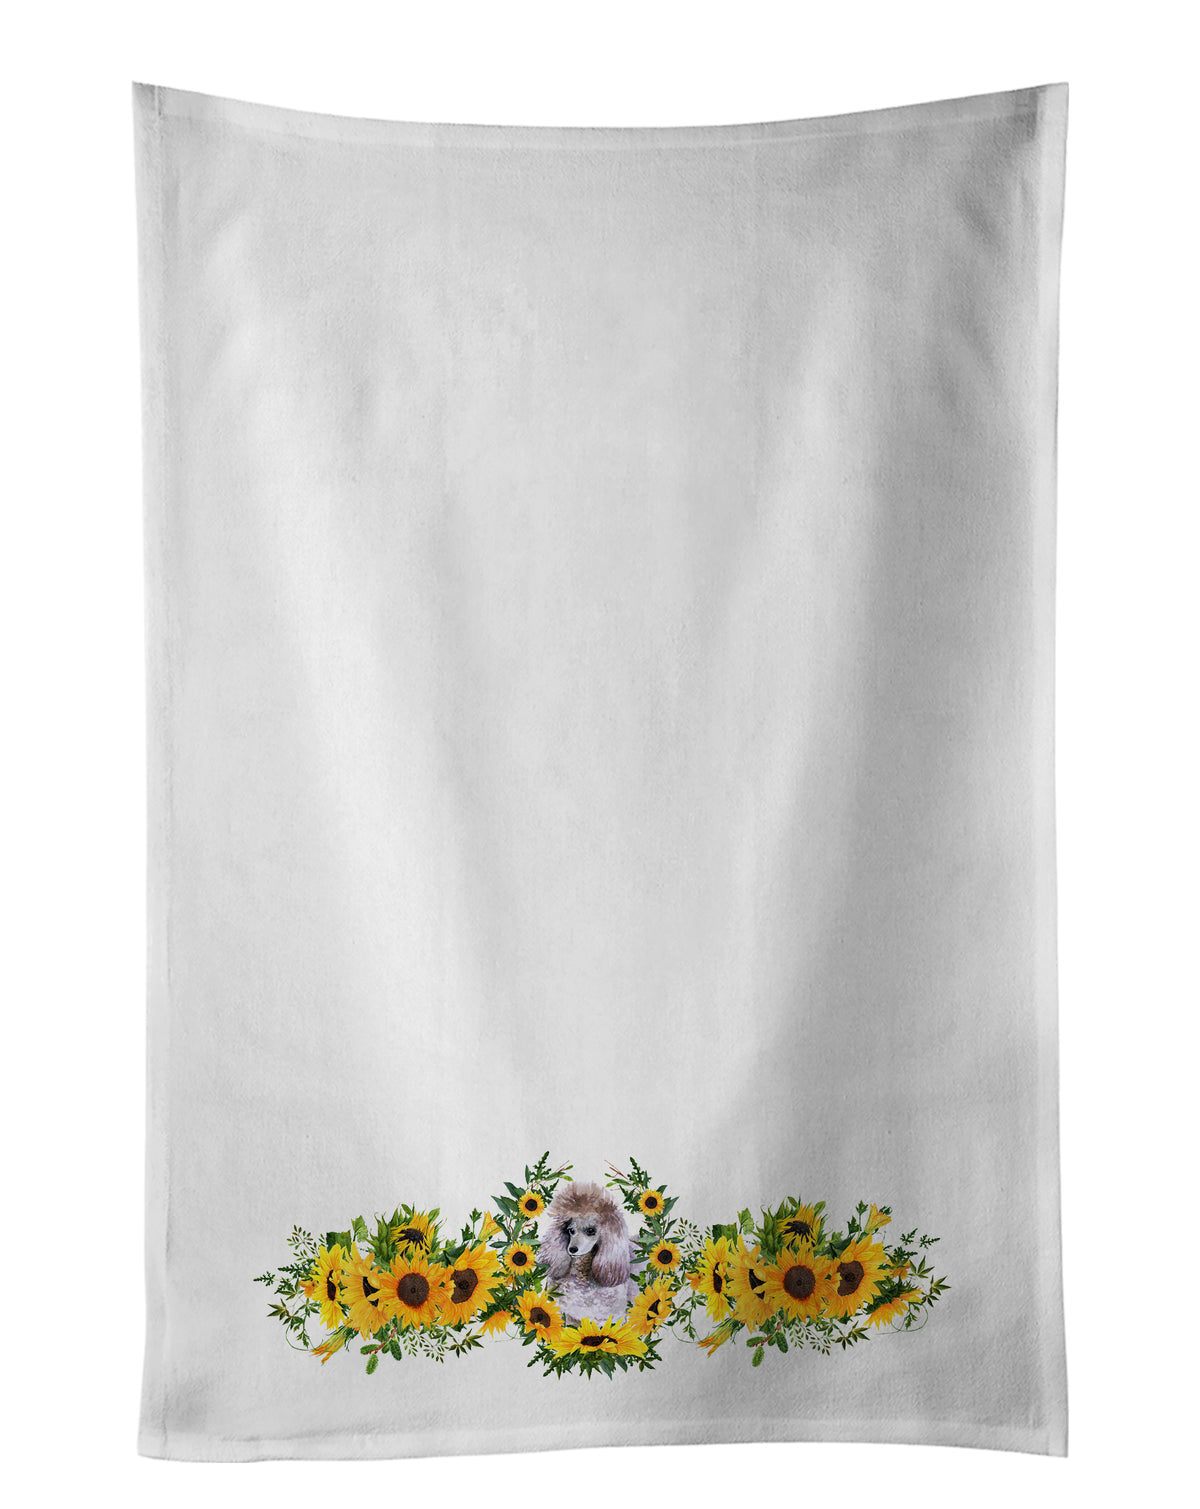 Buy this Poodle in Sunflowers White Kitchen Towel Set of 2